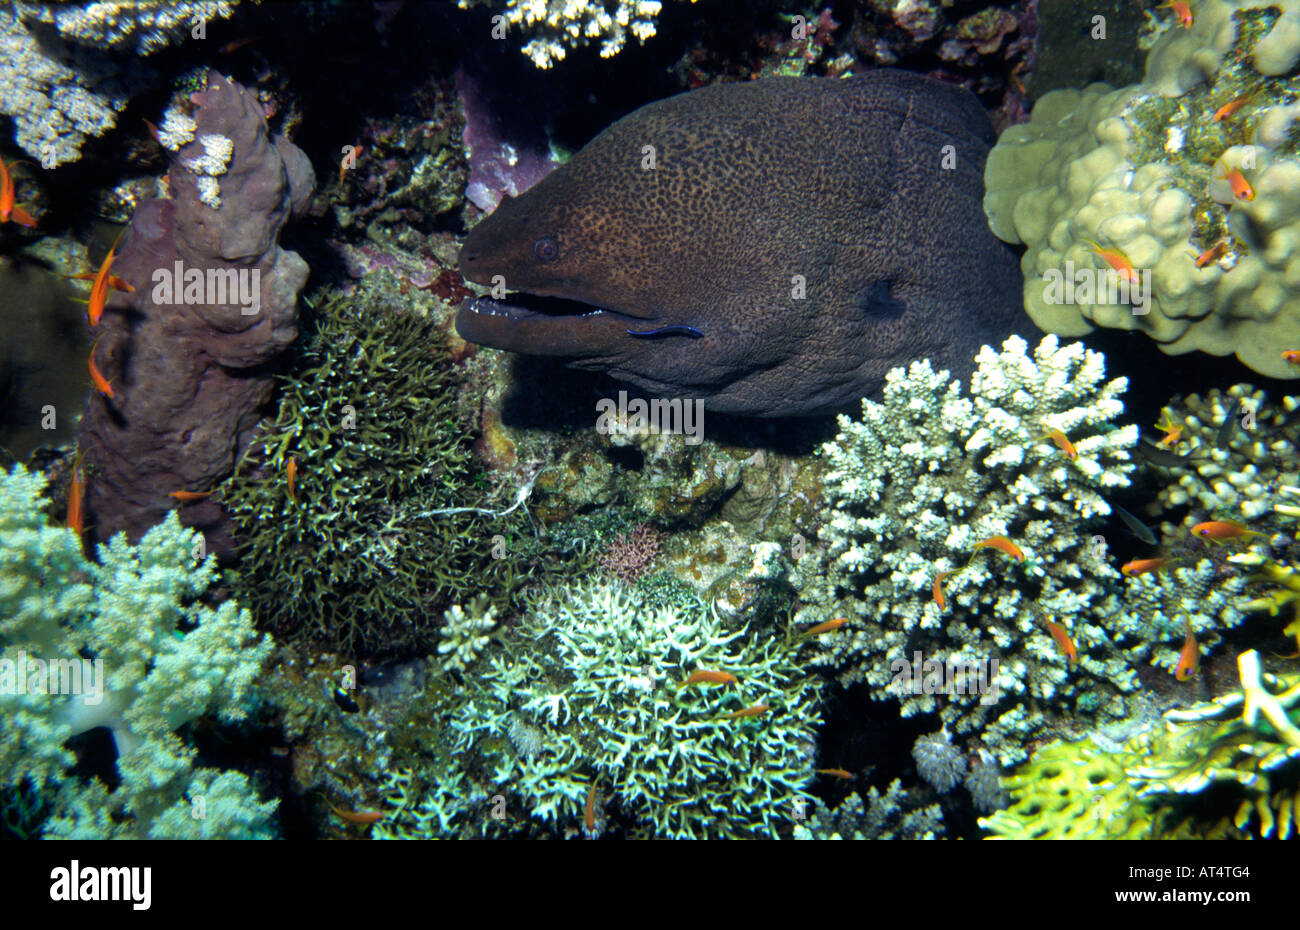 Egypt Red Sea Giant Moray Eel Gymnothorax Sp with Cleaner Wrasse Labroides dimdiatus cleaning mouth Stock Photo